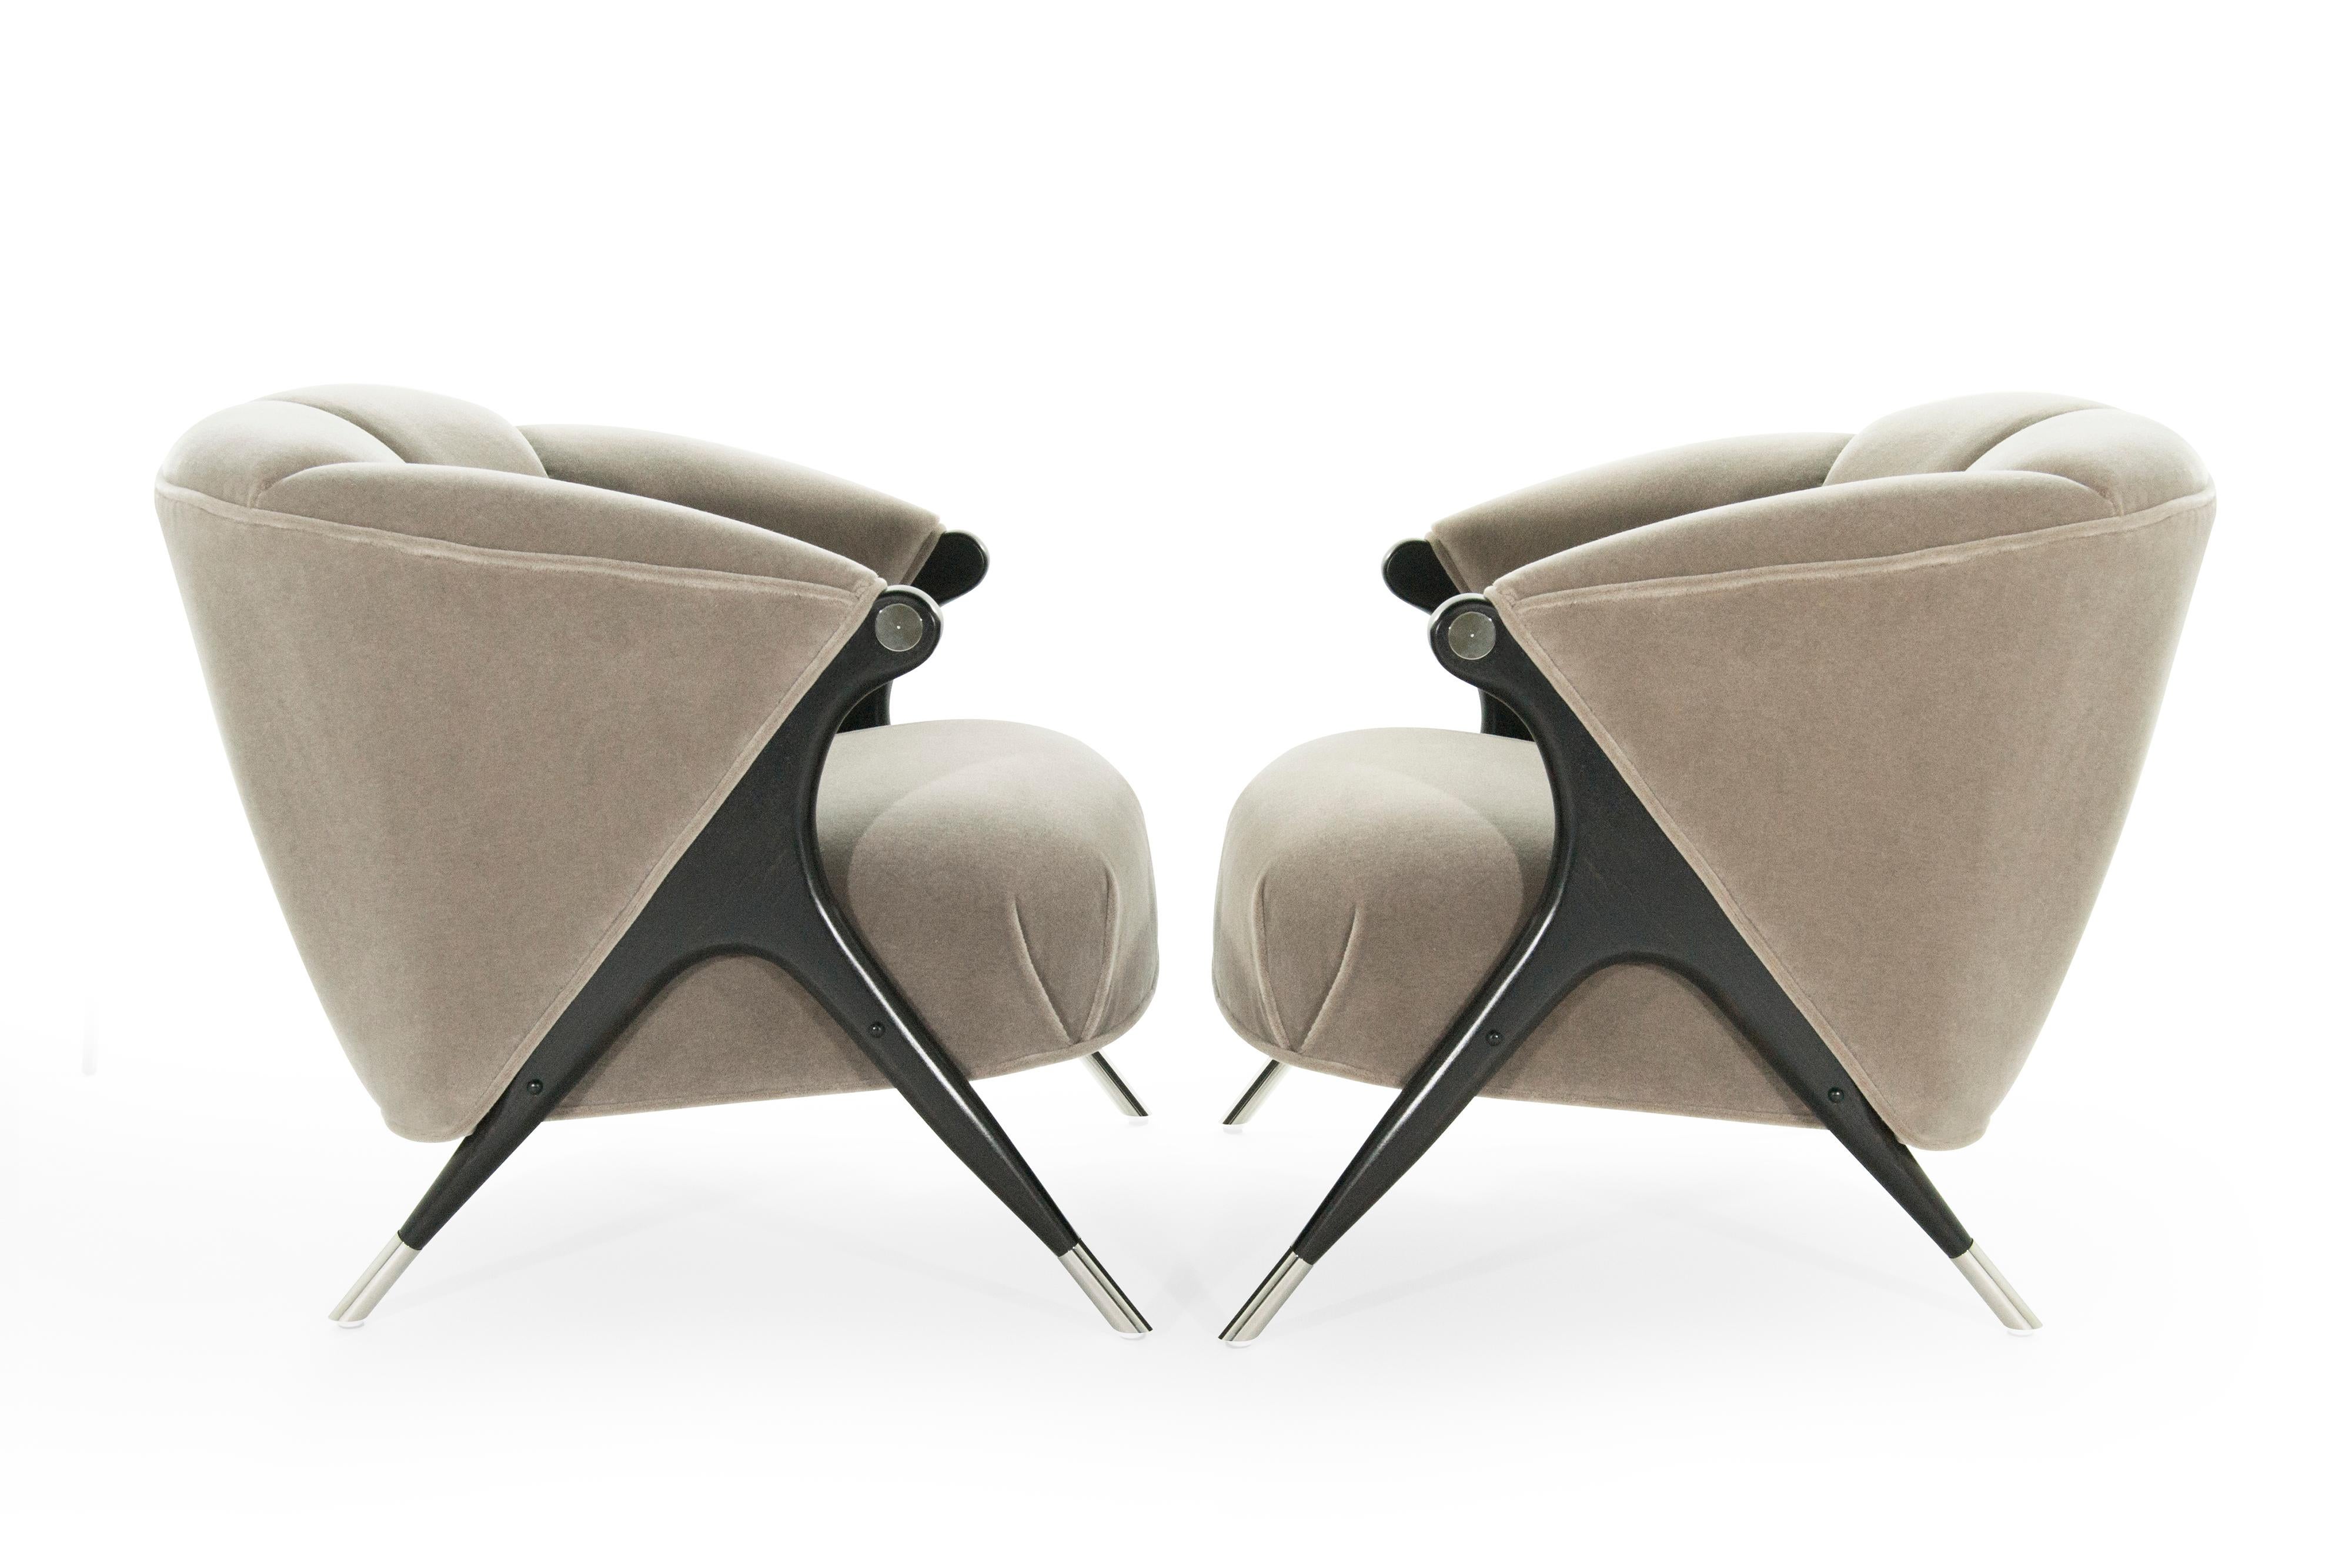 Stunning and rare pair of lounge chair by Karpen of California, circa 1950s.

Newly upholstered in taupe mohair, sculptural maple legs newly restored to their original ebonized finish, newly nickel-plated sabots and arm hardware.

Priced as pair.